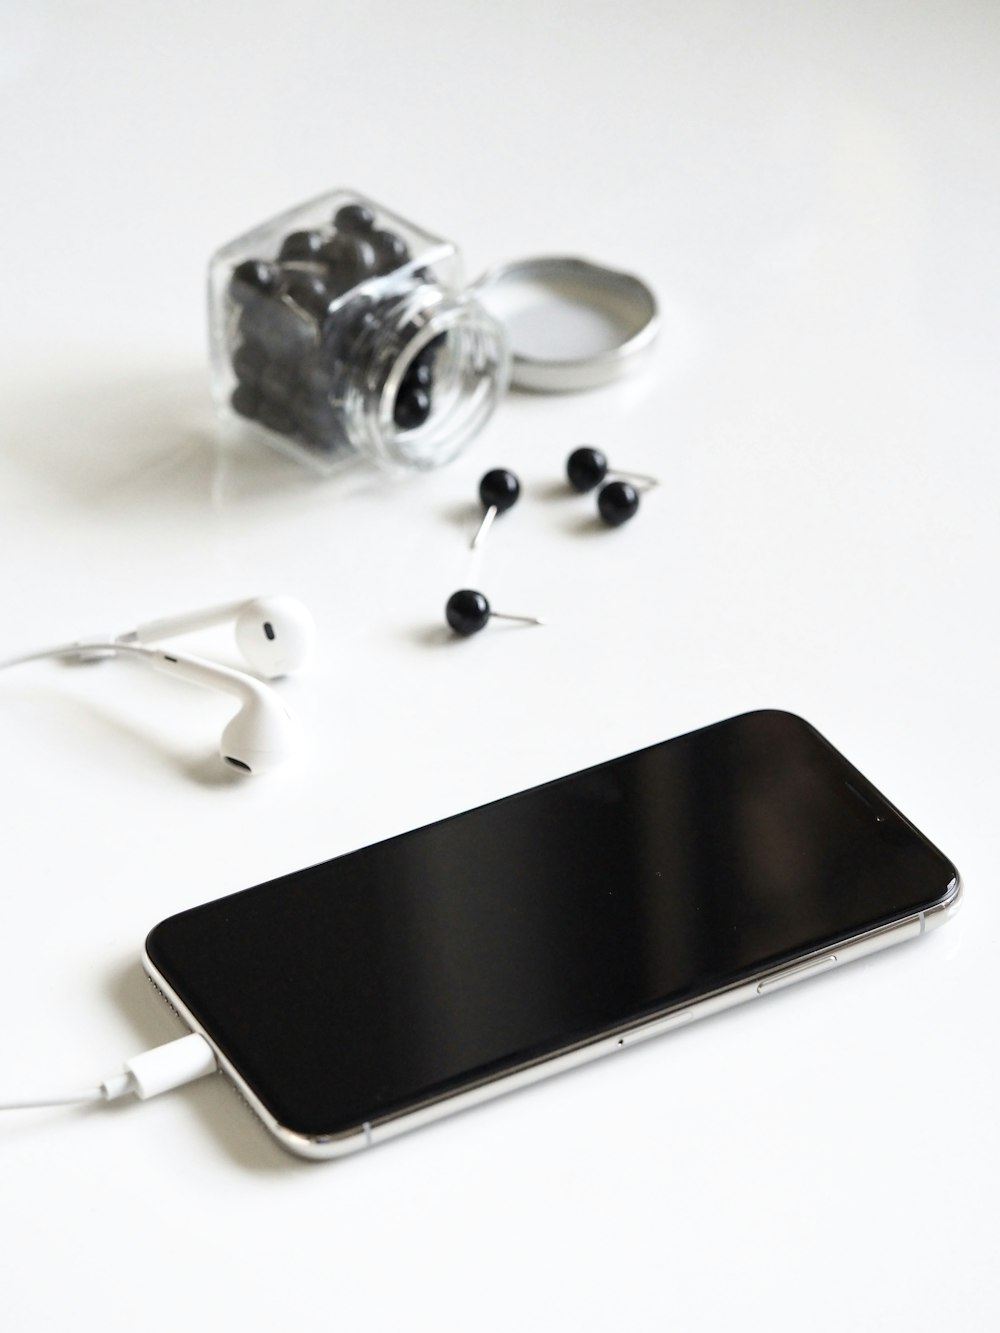 a cell phone and ear buds on a table